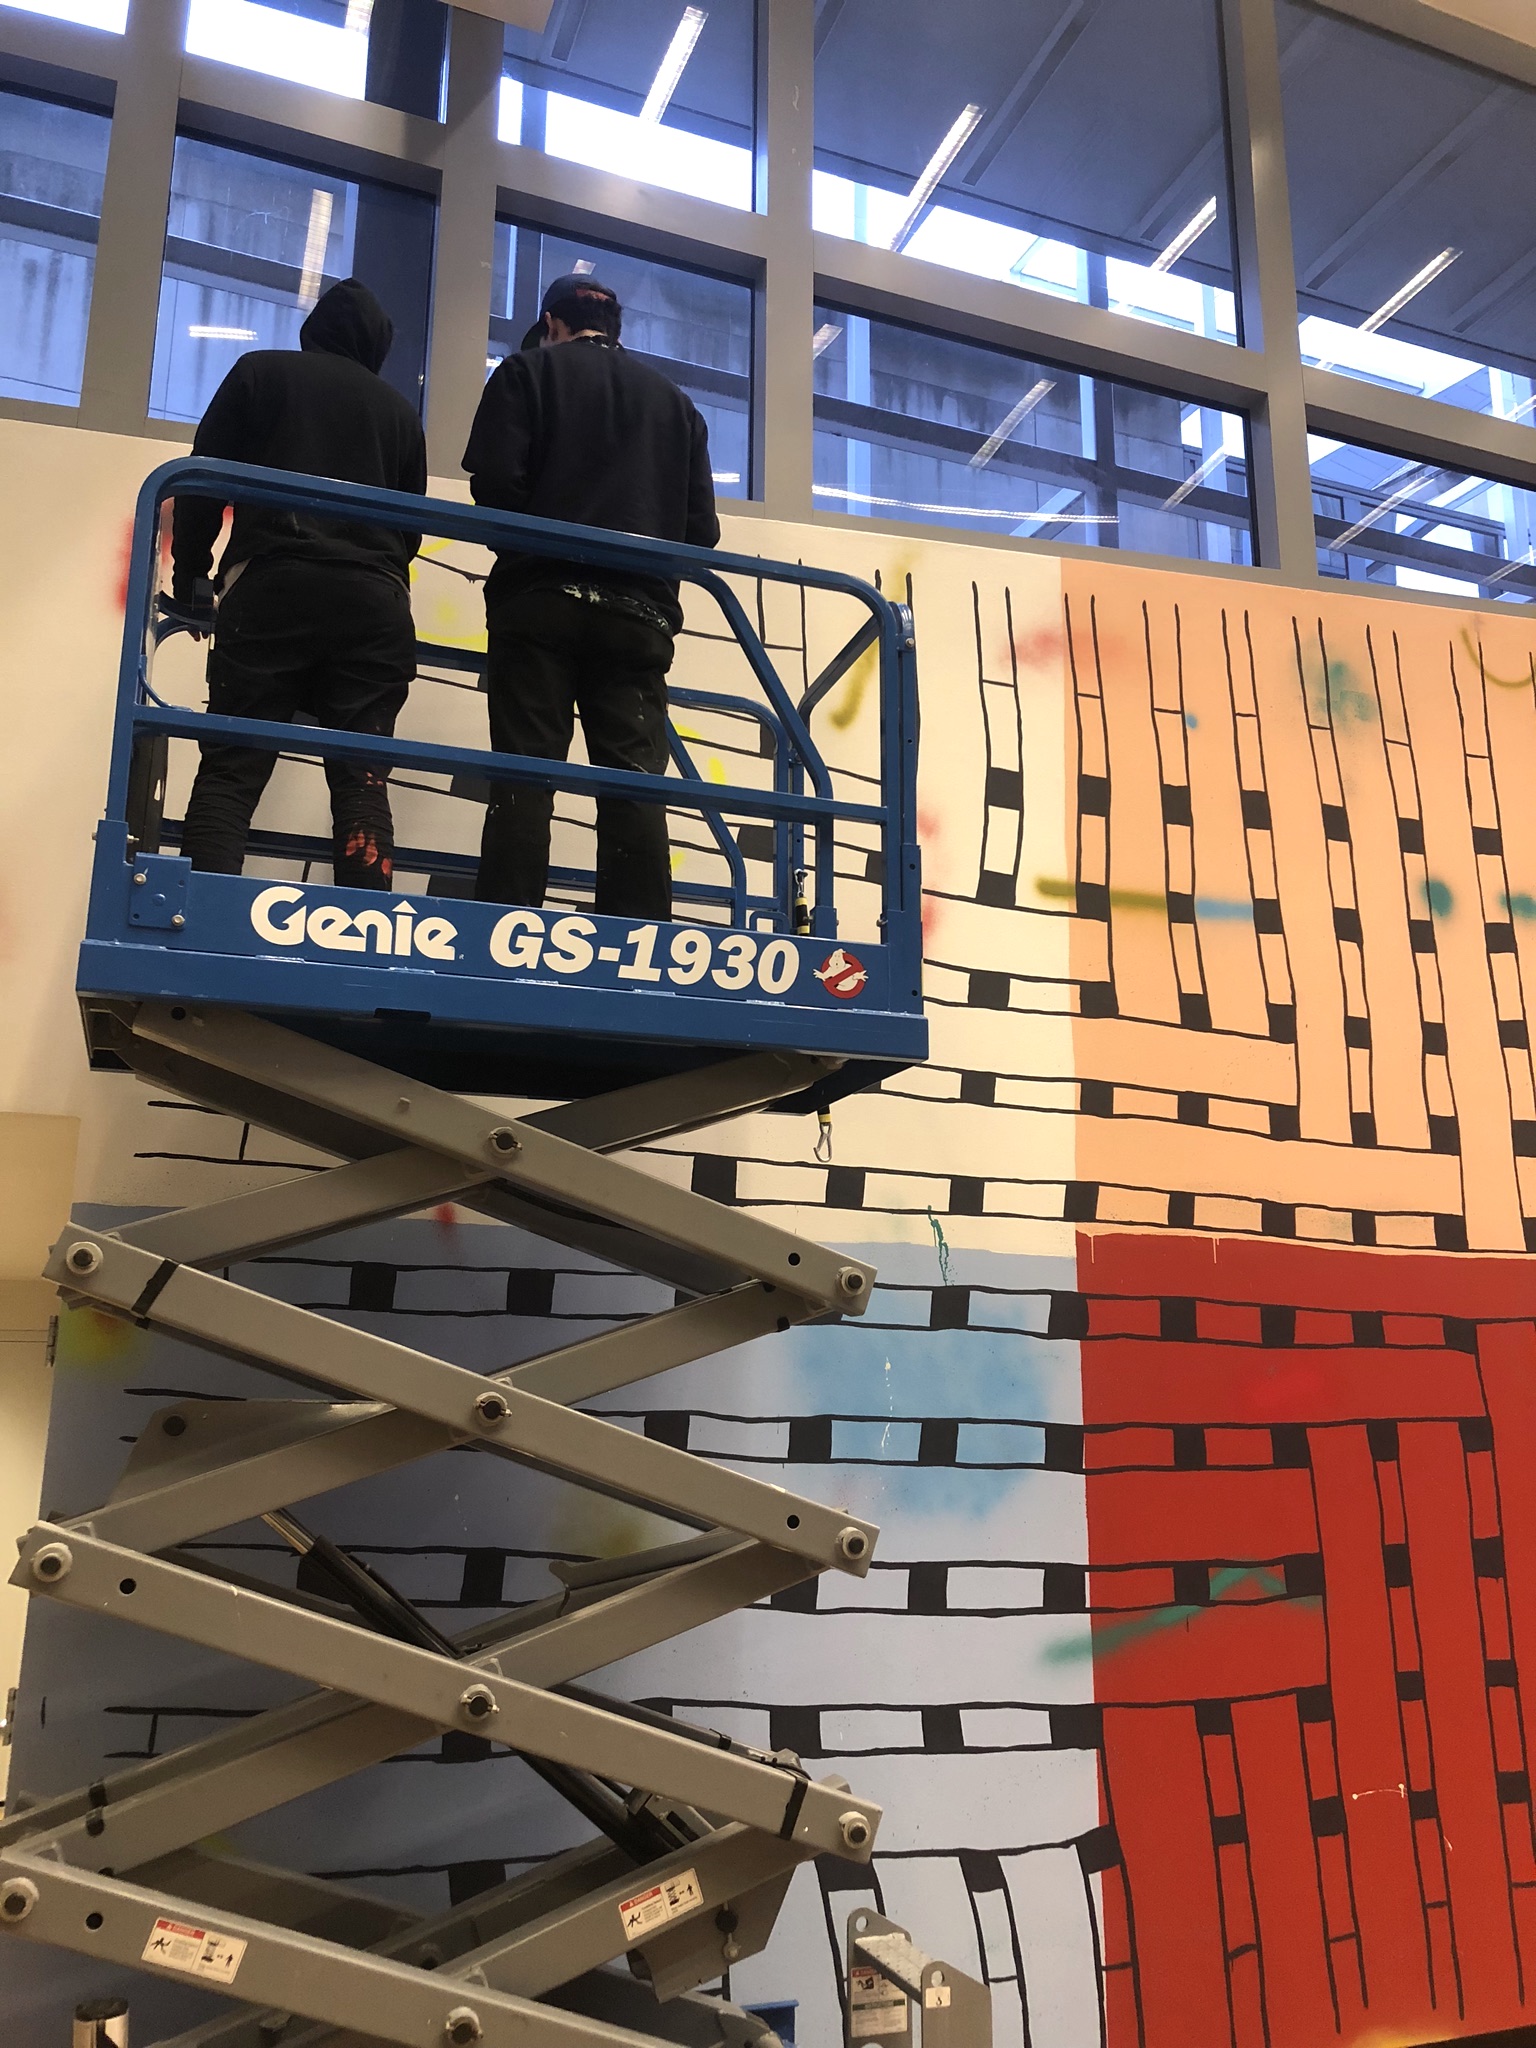 Artists Alicia McCarthy and Oliver Hawk Holden work on the site-specific mural No Straight Lines at the Wexner Center for the Arts at The Ohio State University